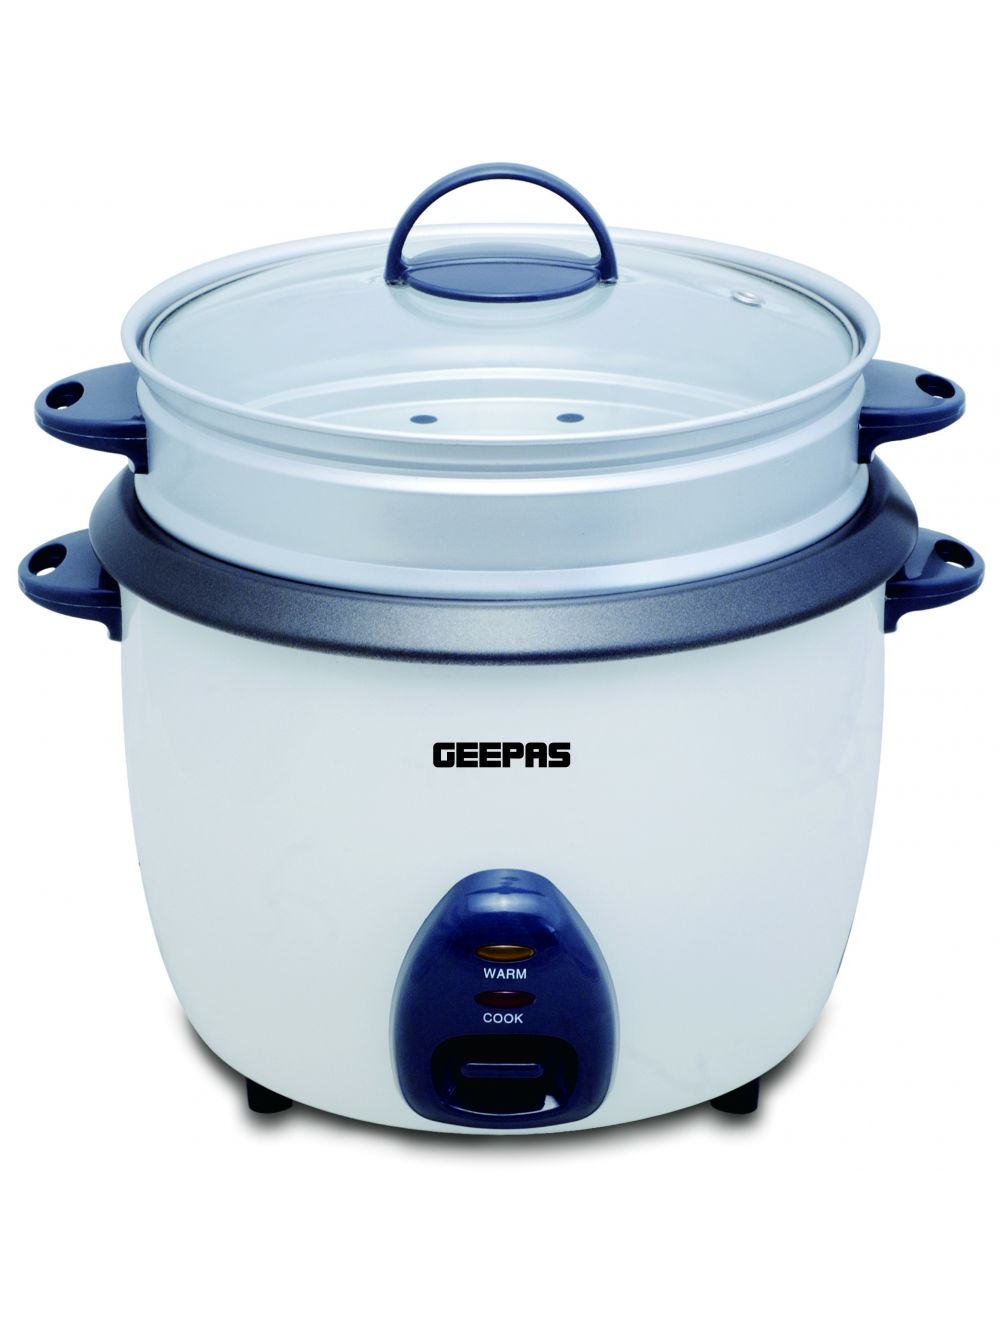 Geepas 1 Litre Electric Rice Cooker, White, Grc4325